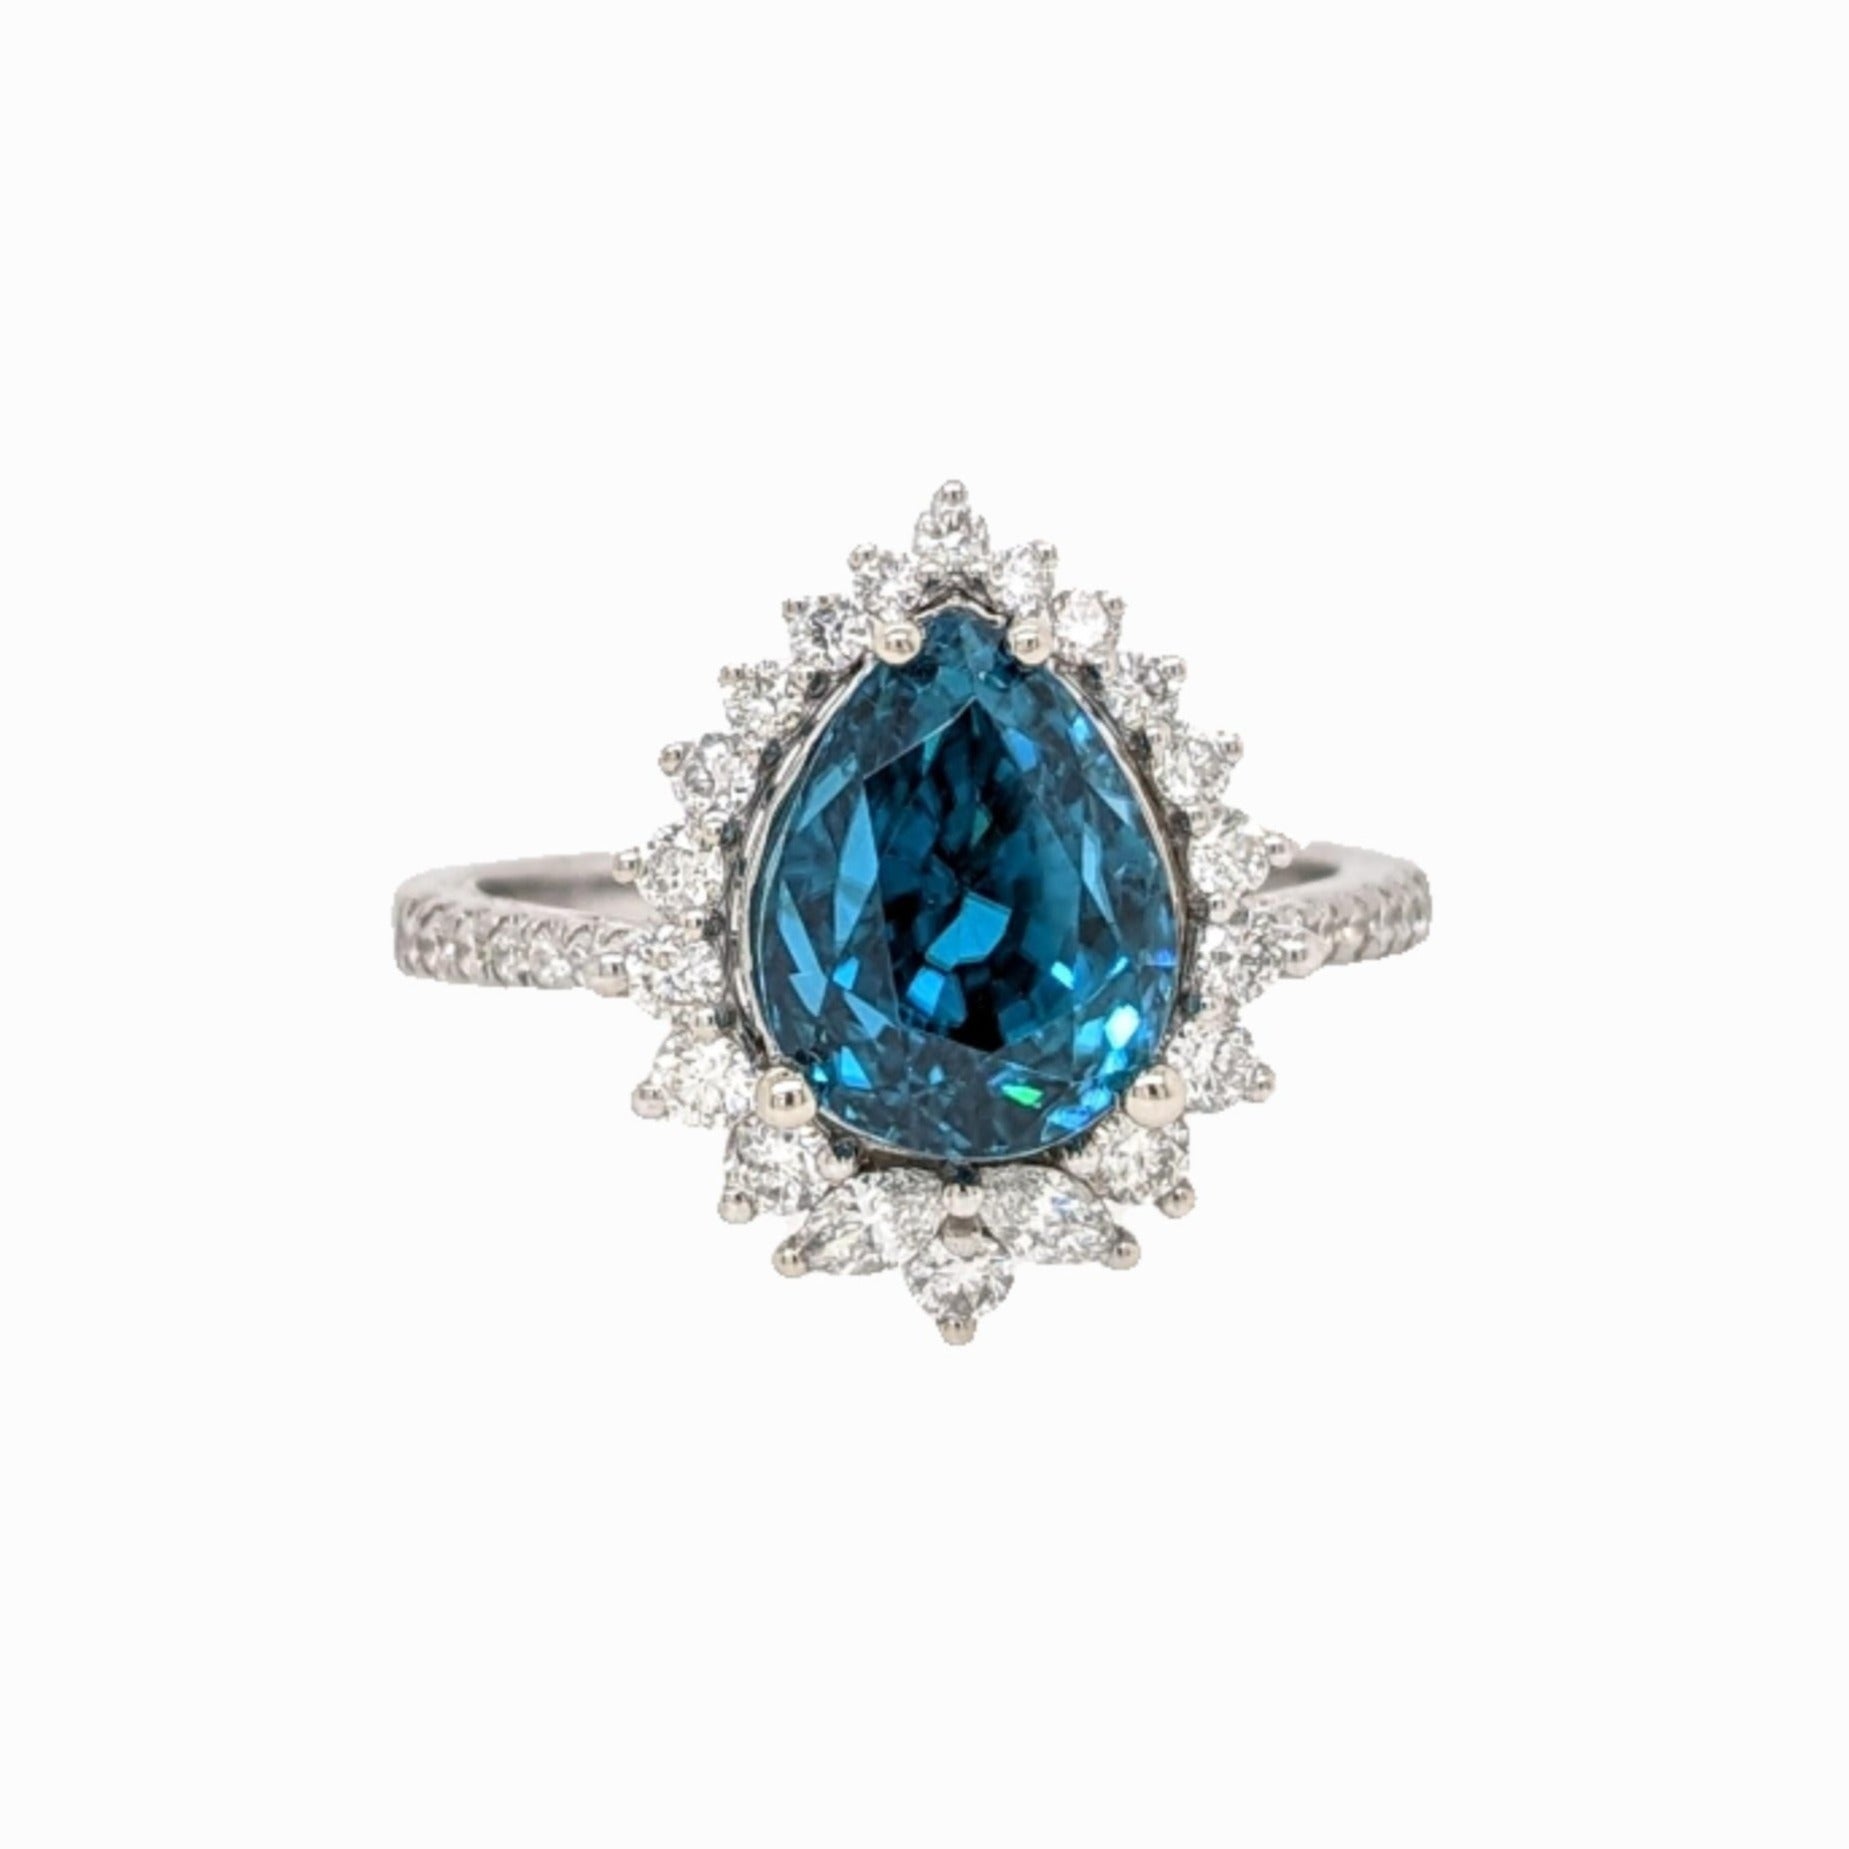 5ct Blue Zircon Ring w Natural Diamonds in Solid 14K White Gold Pear 10x8mm